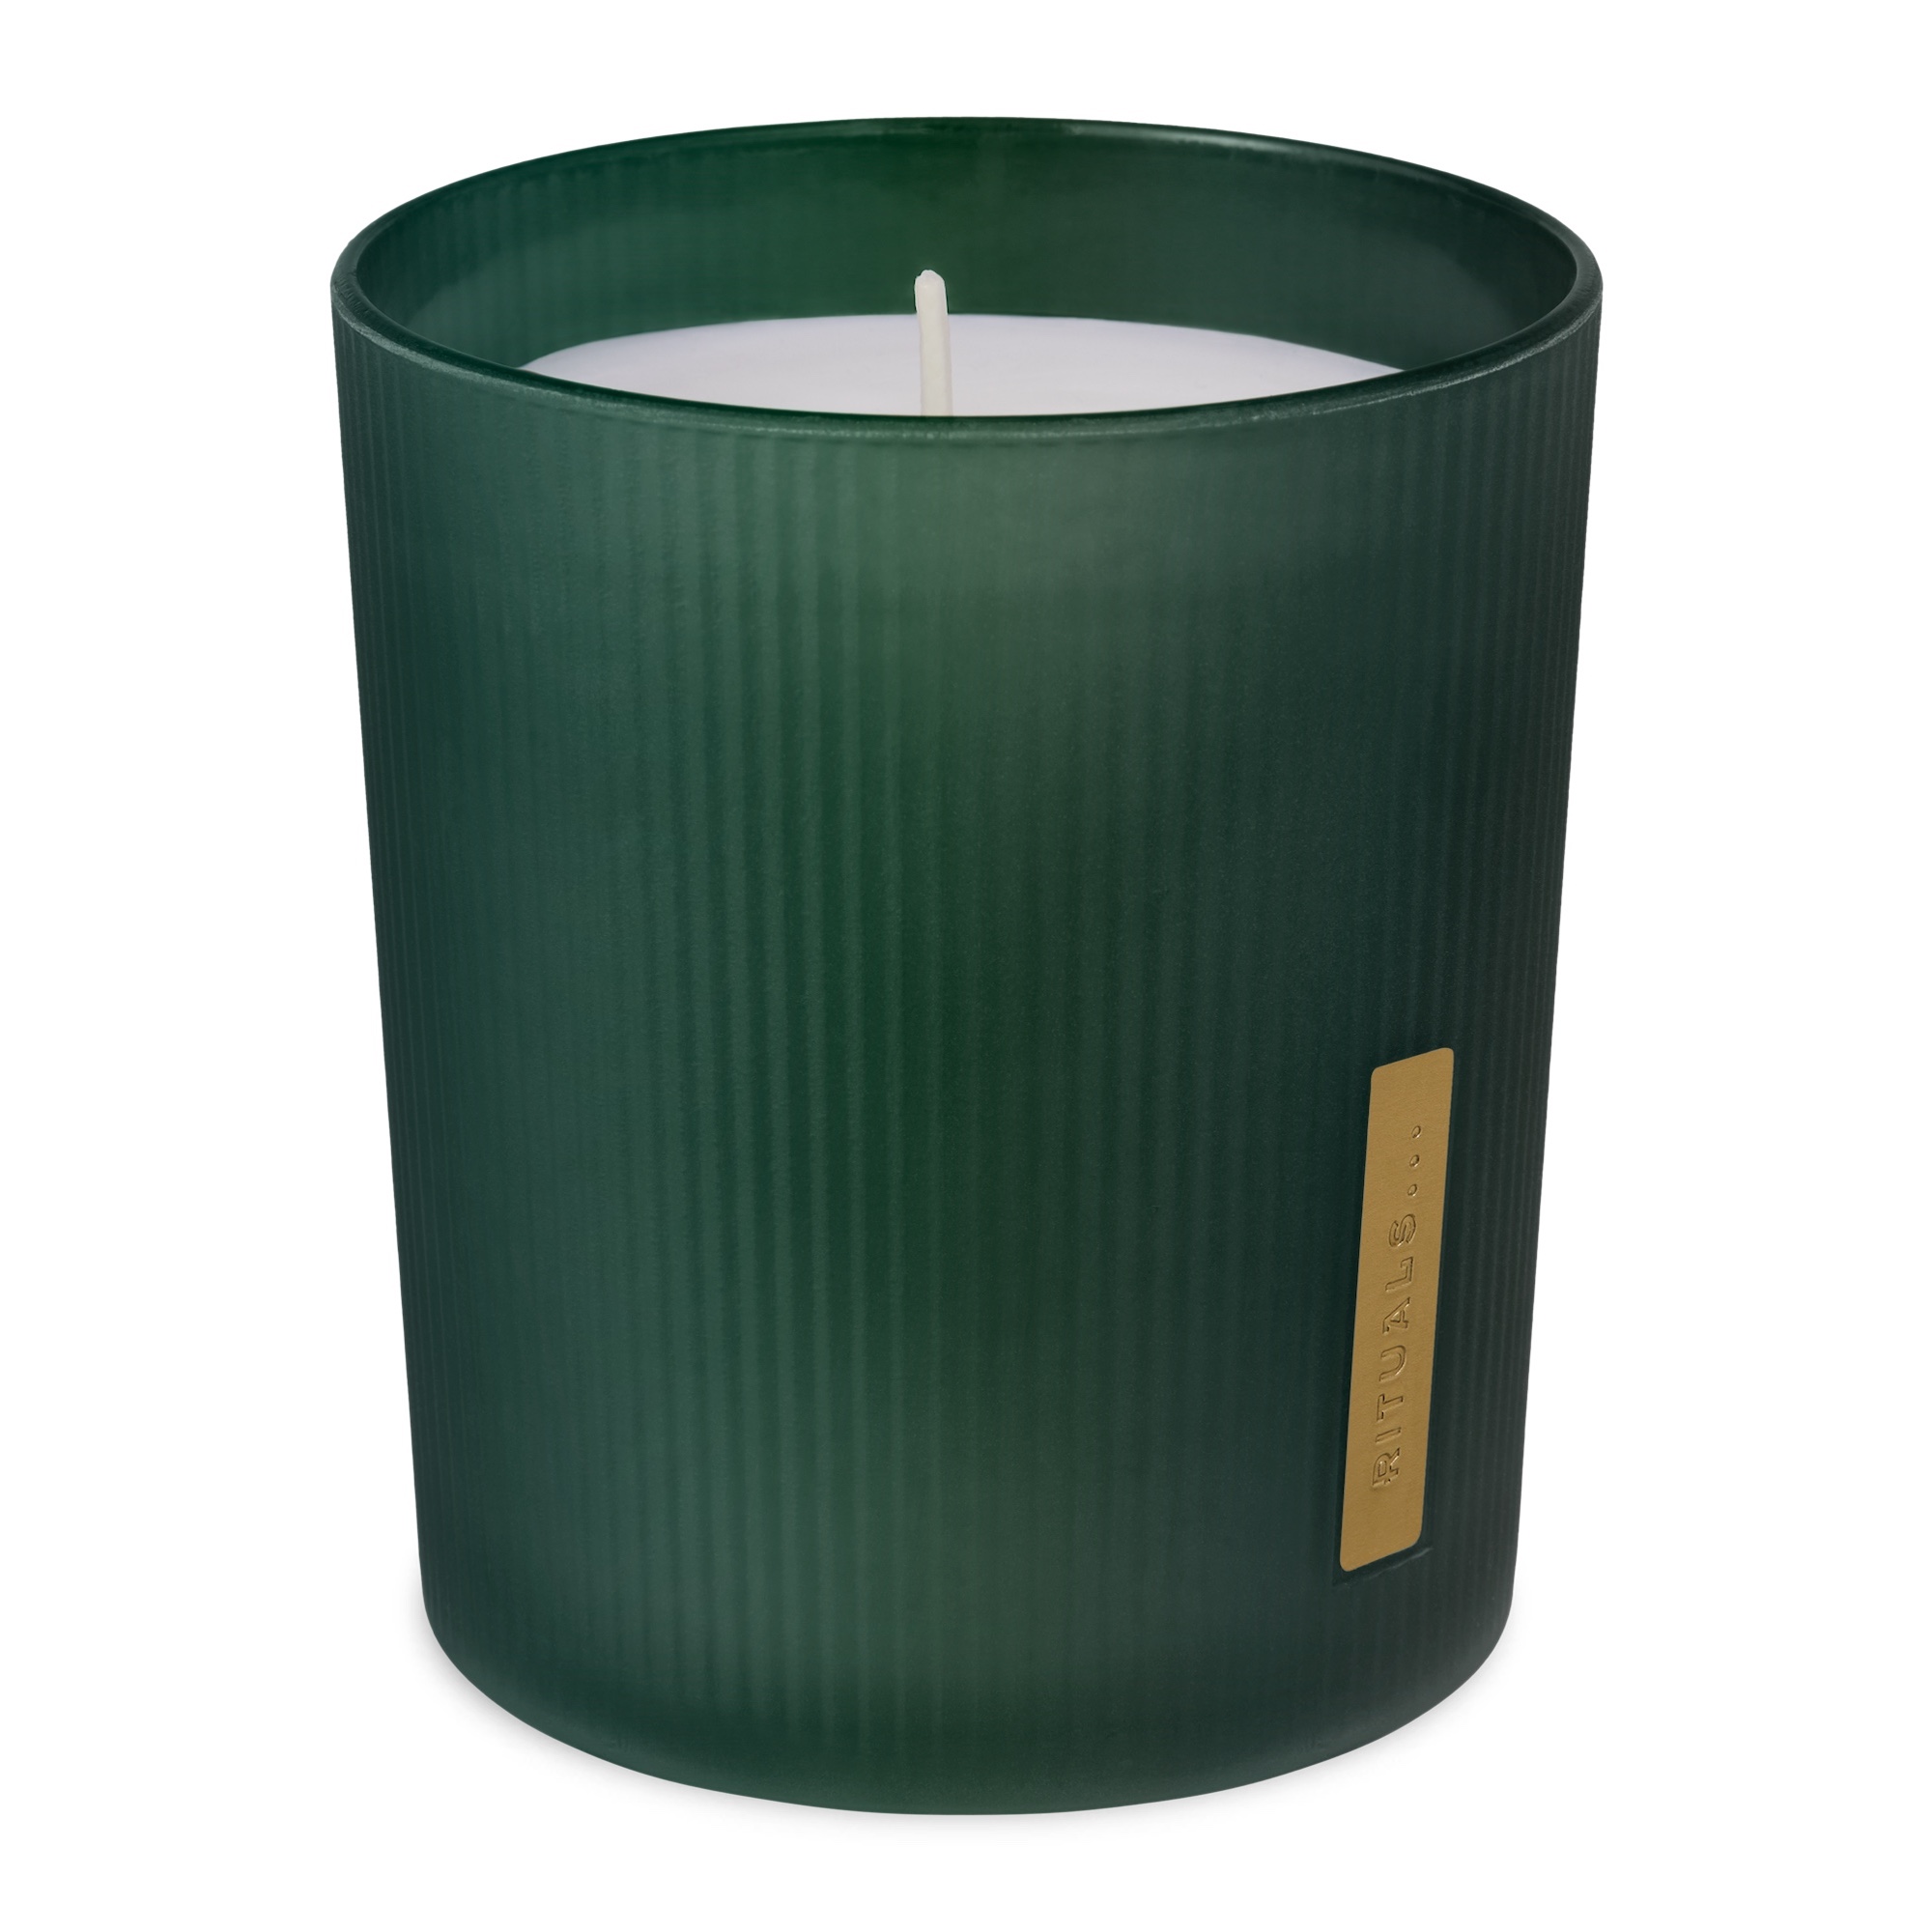 Rituals The Ritual of Jing Scented Candle, The Ritual Of Jing, Rituale, Rituals, Marken